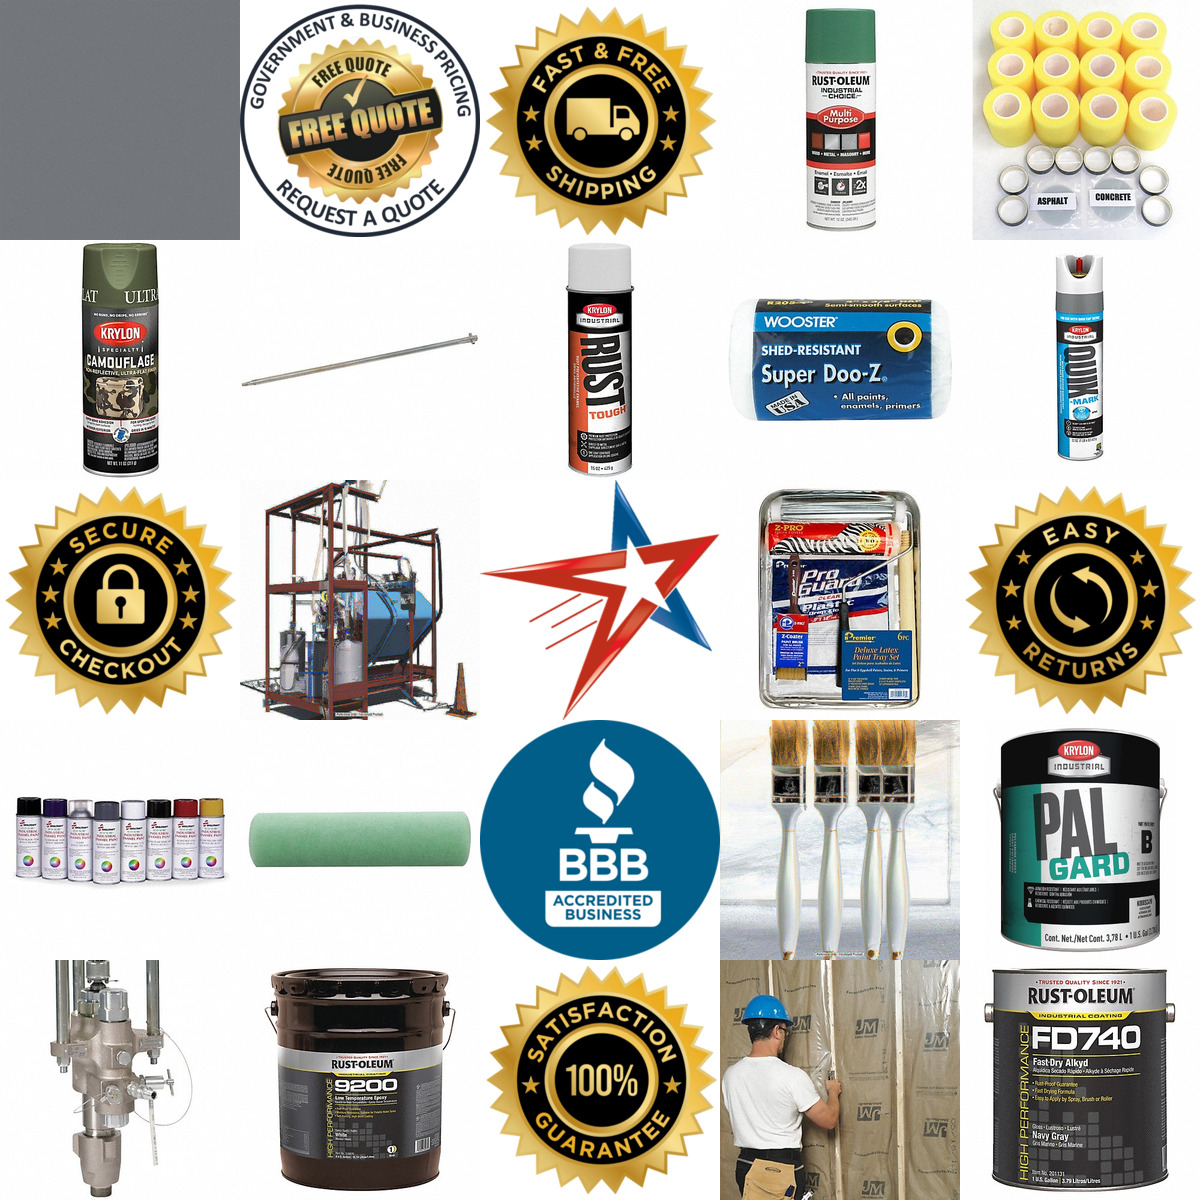 A selection of Paint Equipment and Supplies products on GoVets